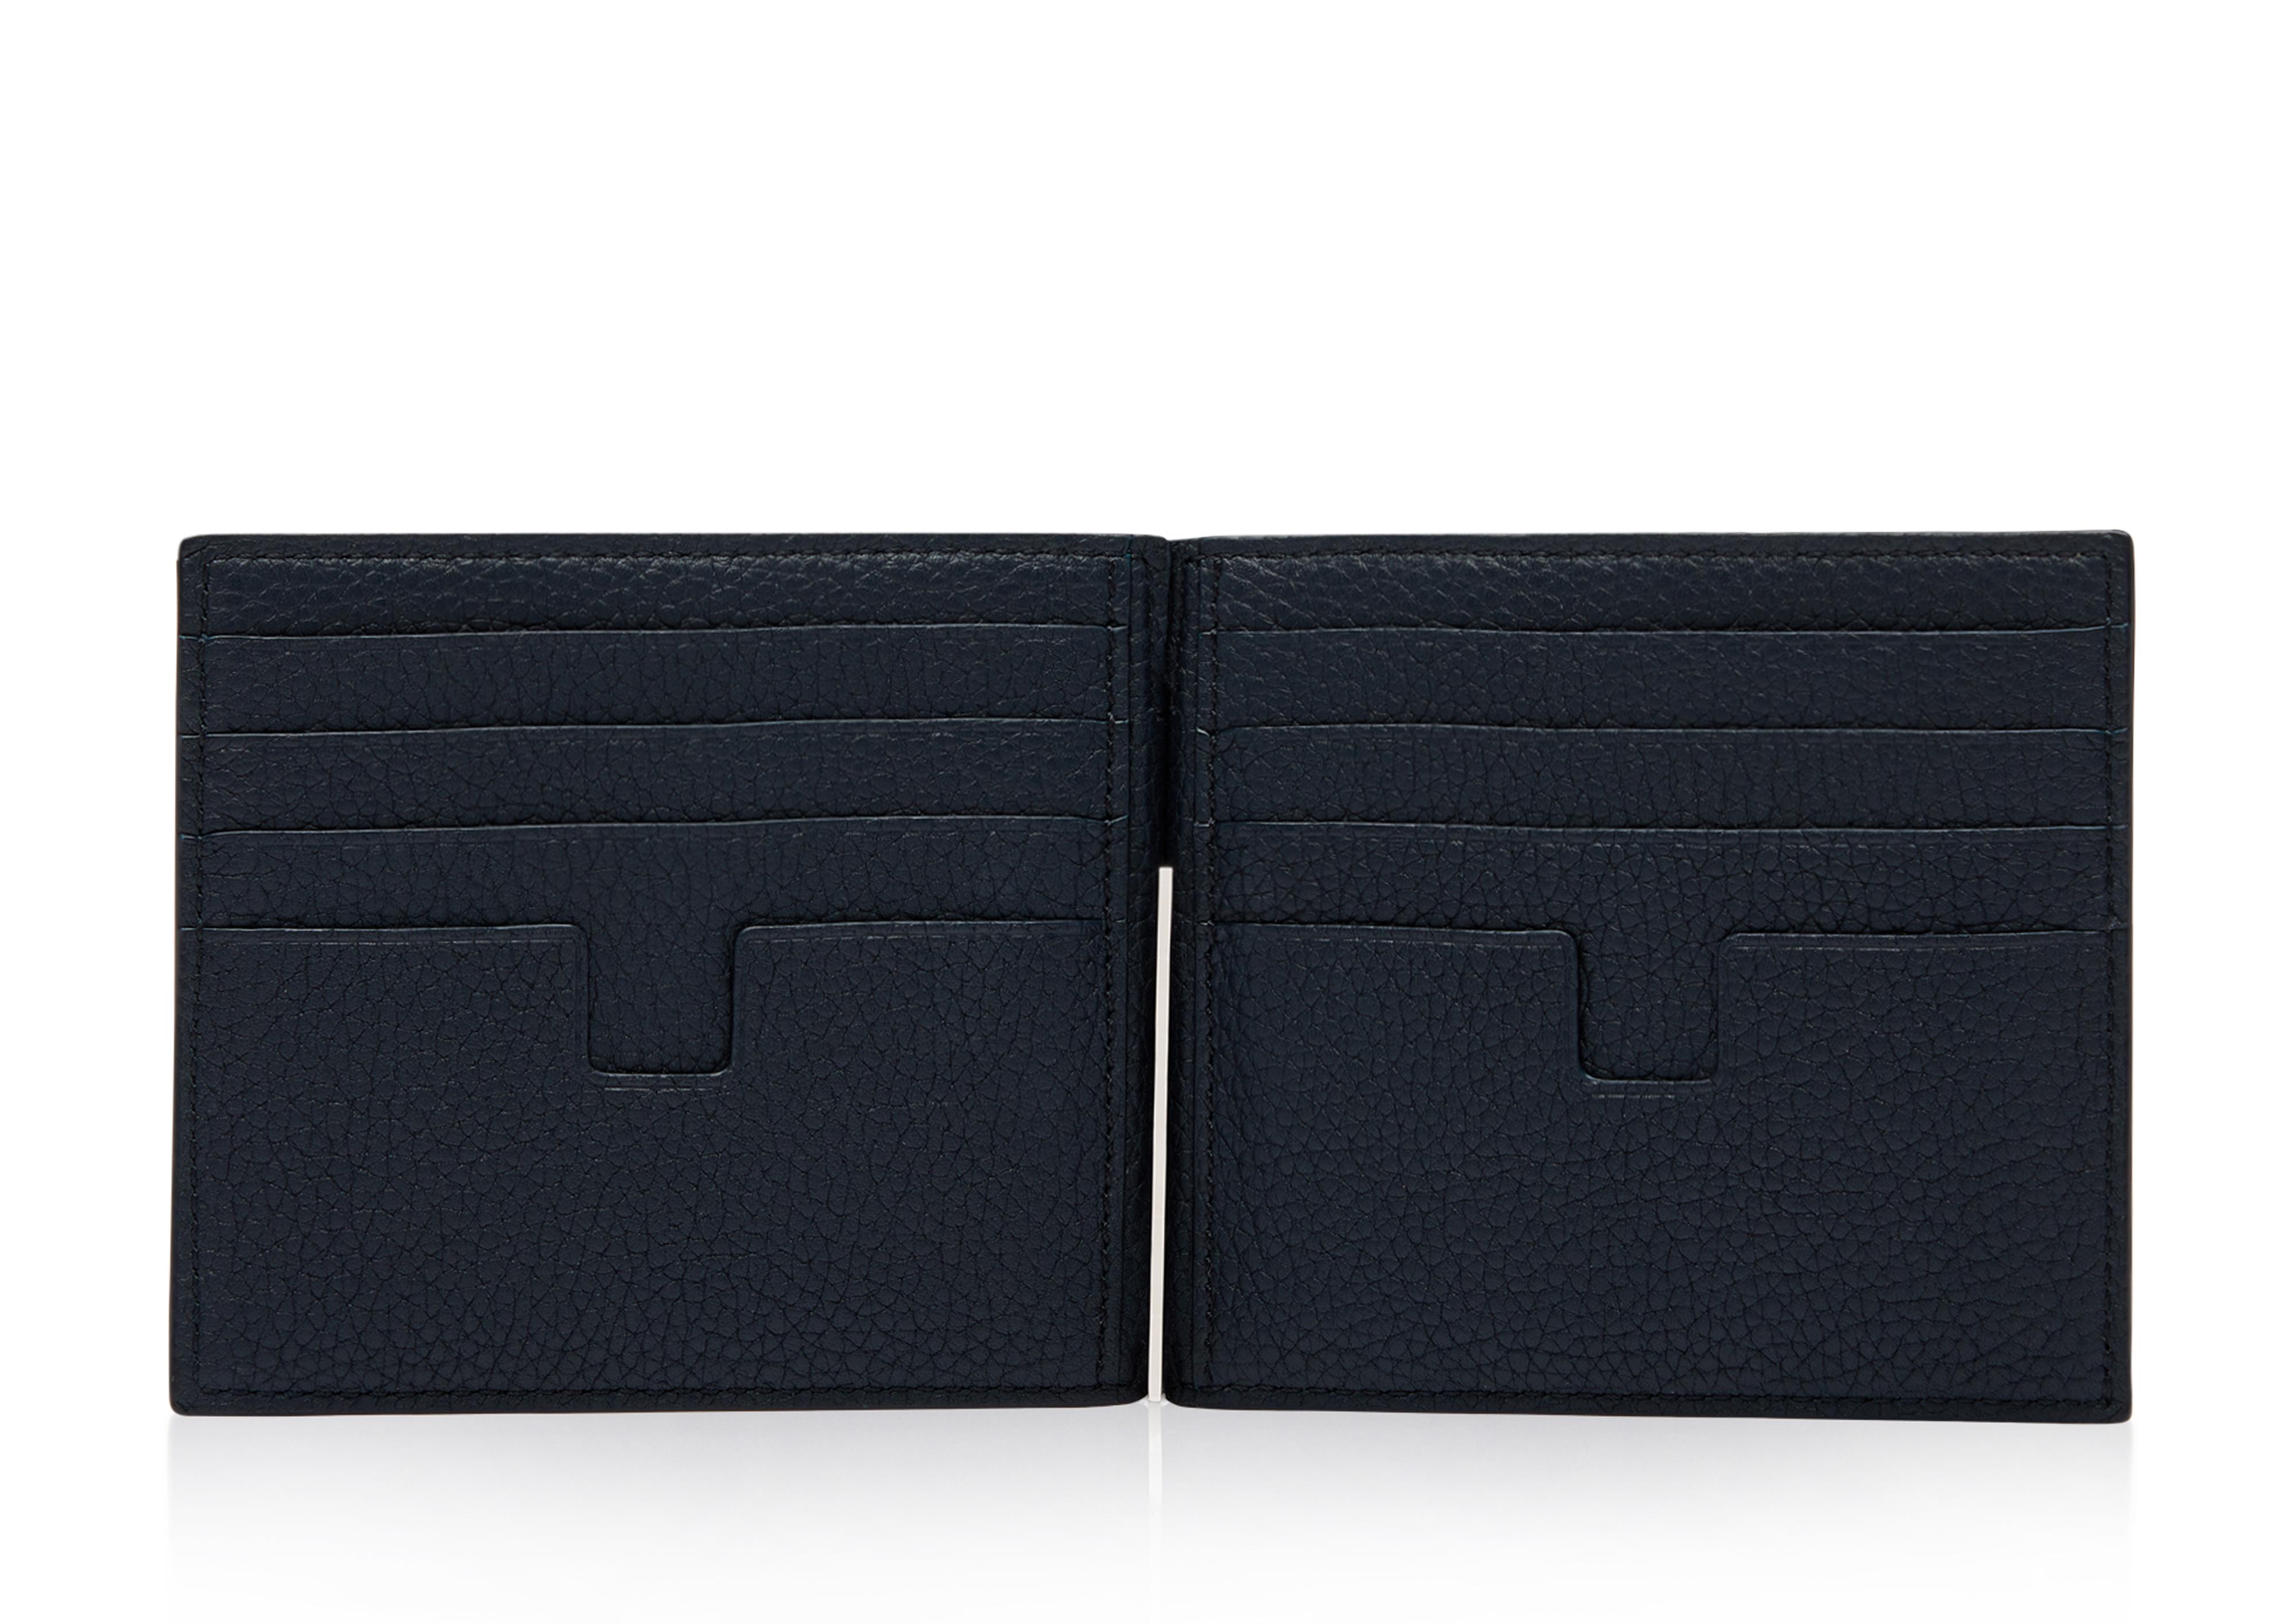 TOM FORD - His most wanted – a luxurious Money Clip Wallet.  tmfrd.co/MensWallets #TOMFORD